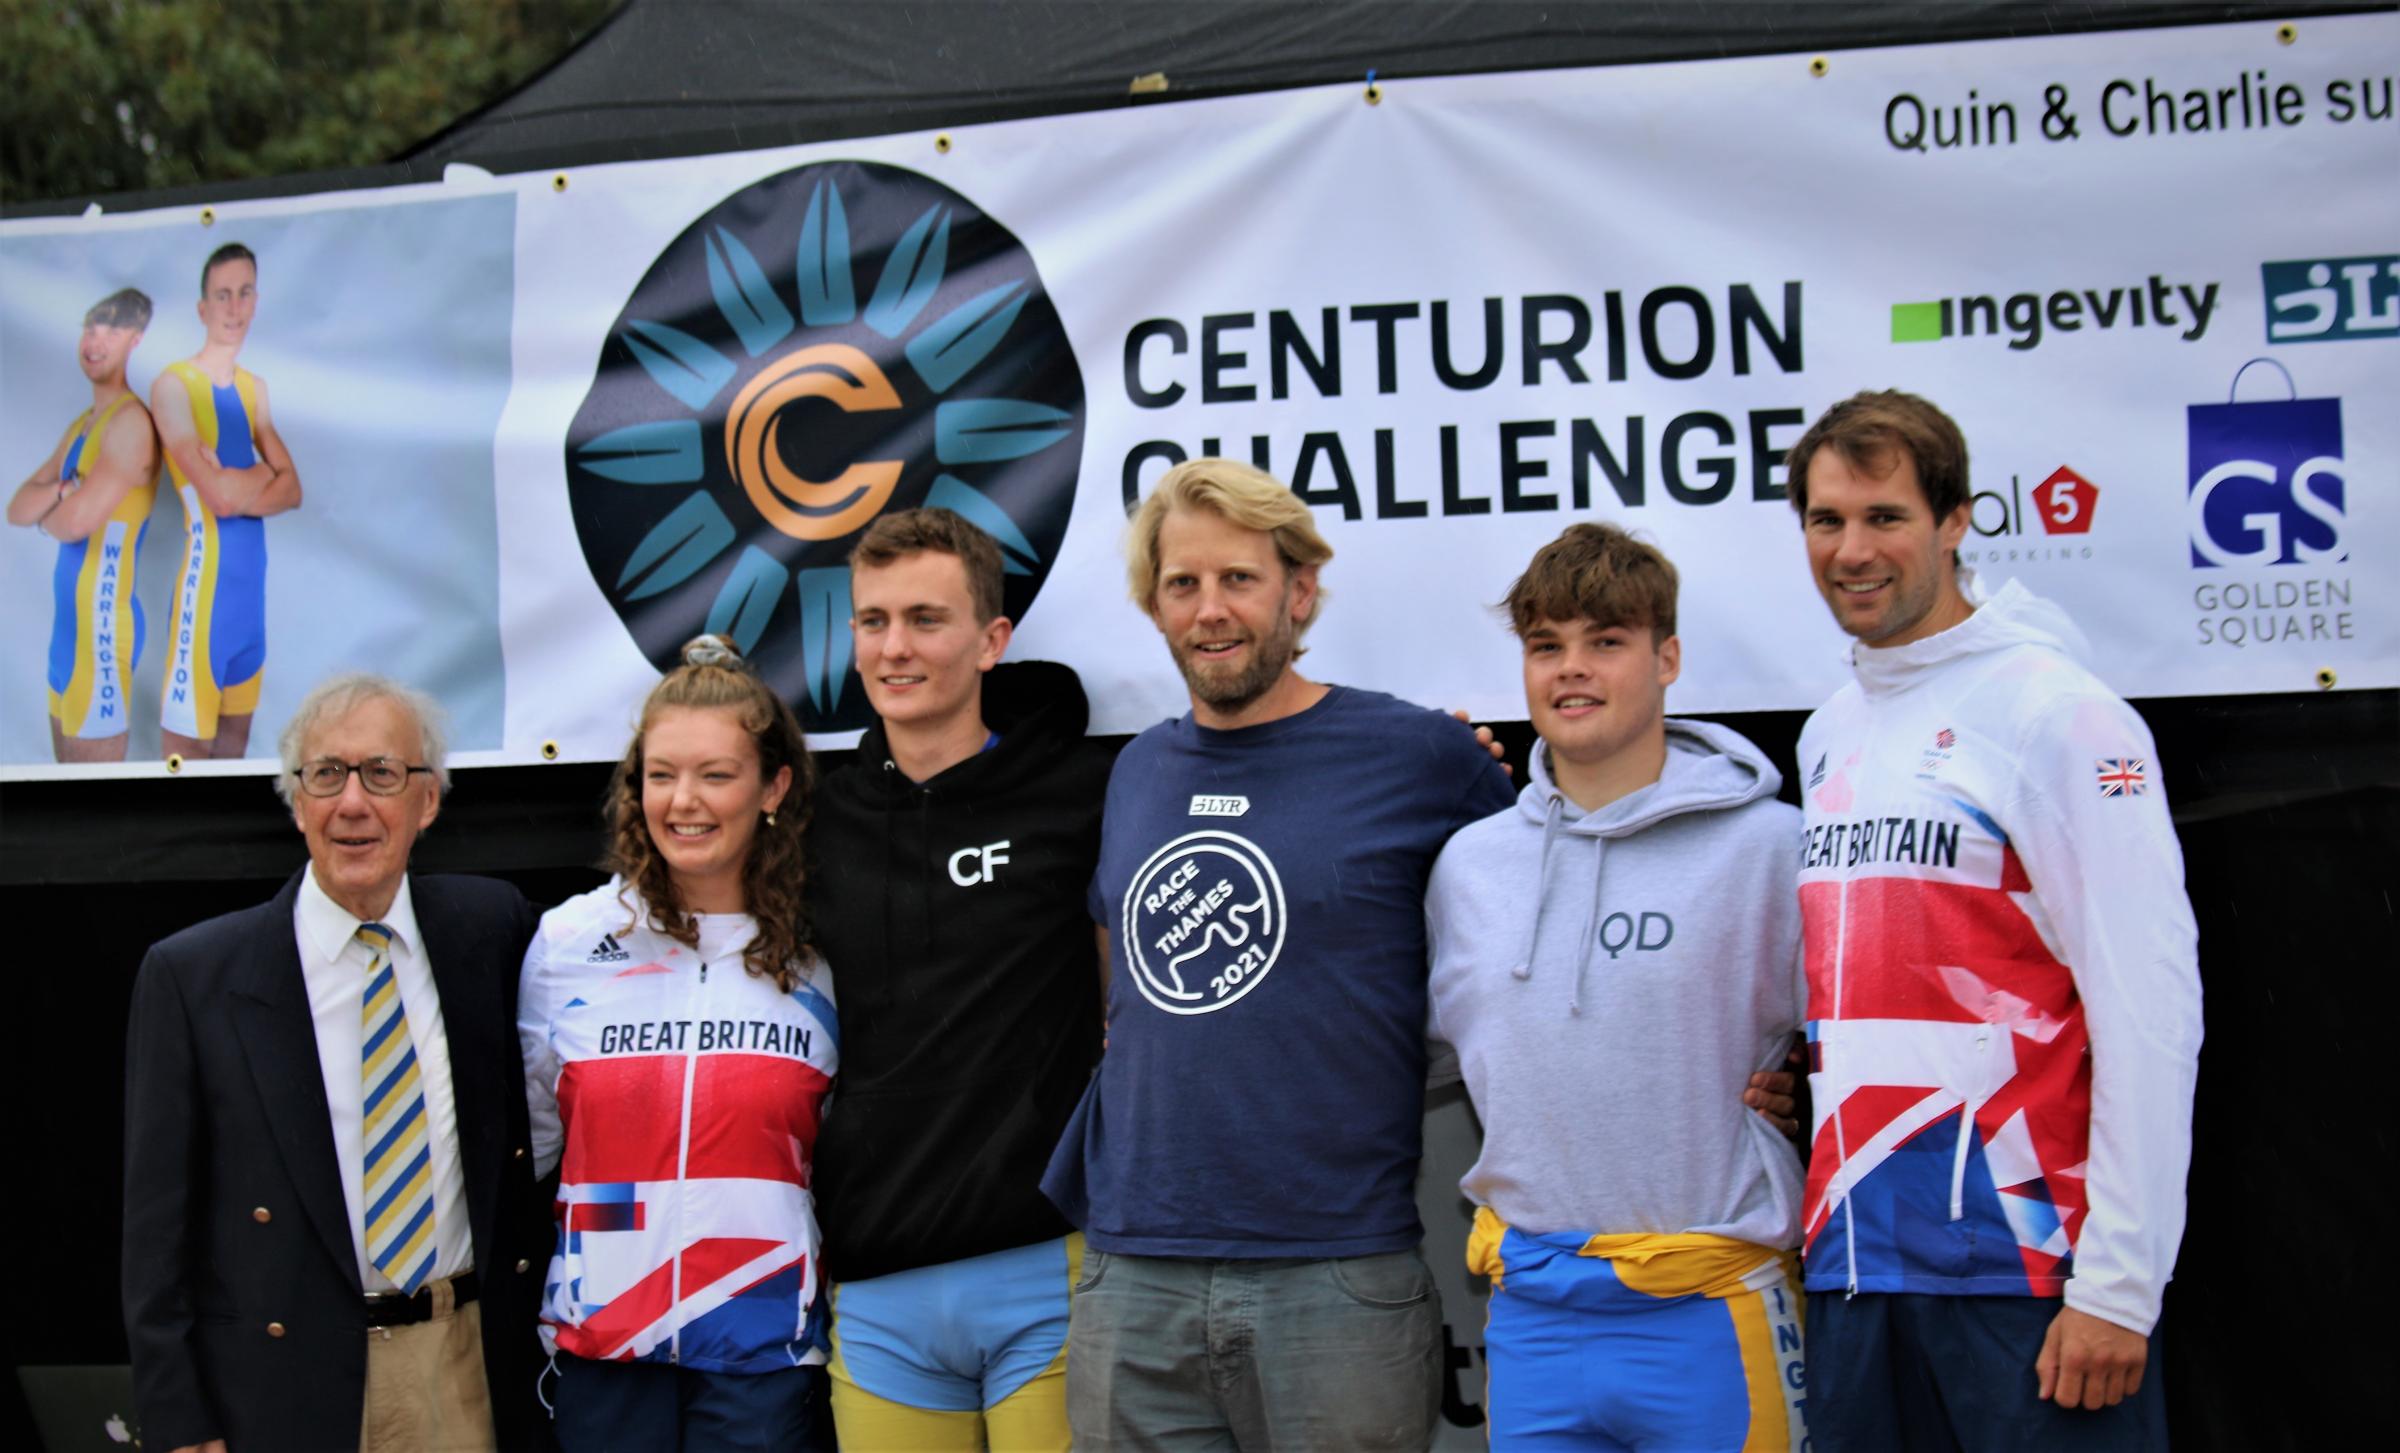 Quinlan Dunne and Charlie Ford with Andy Triggs-Hodge (triple Olympic gold medalist) Lucy Glover (Warringtons very own Tokyo 2020 Olympian), Graeme Thomas (also a north west Olympian who competed in Tokyo) and Mac Warrington Rowing Club President